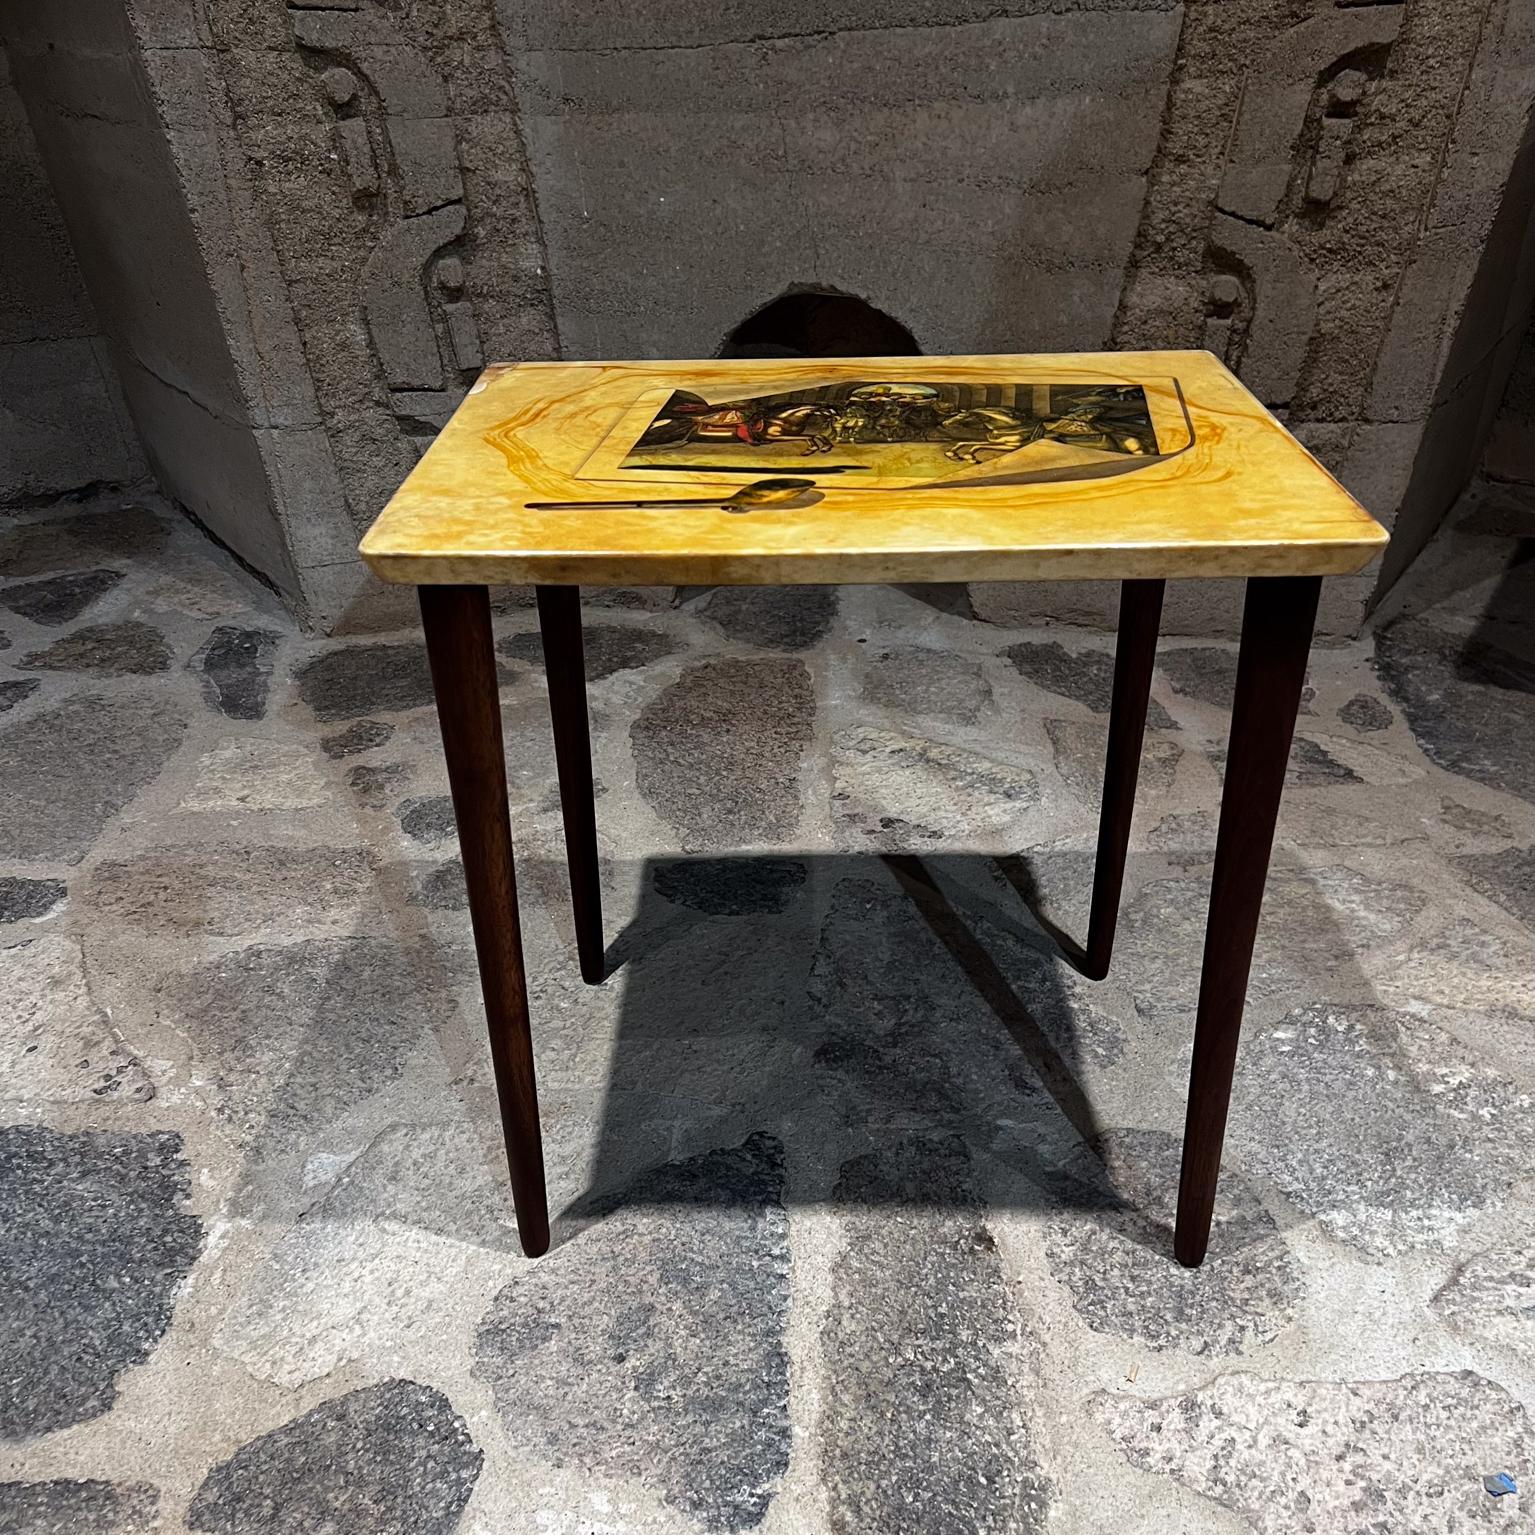 Aldo Tura Side Table mahogany wood and goatskin Italy 1950s
Tabletop has exquisite renaissance art after Piero Fornasetti.
Unmarked.
19 w x 14.5 d x 19 h
Legs can be removed.
Original unrestored vintage condition. Wear consistent with age and use.